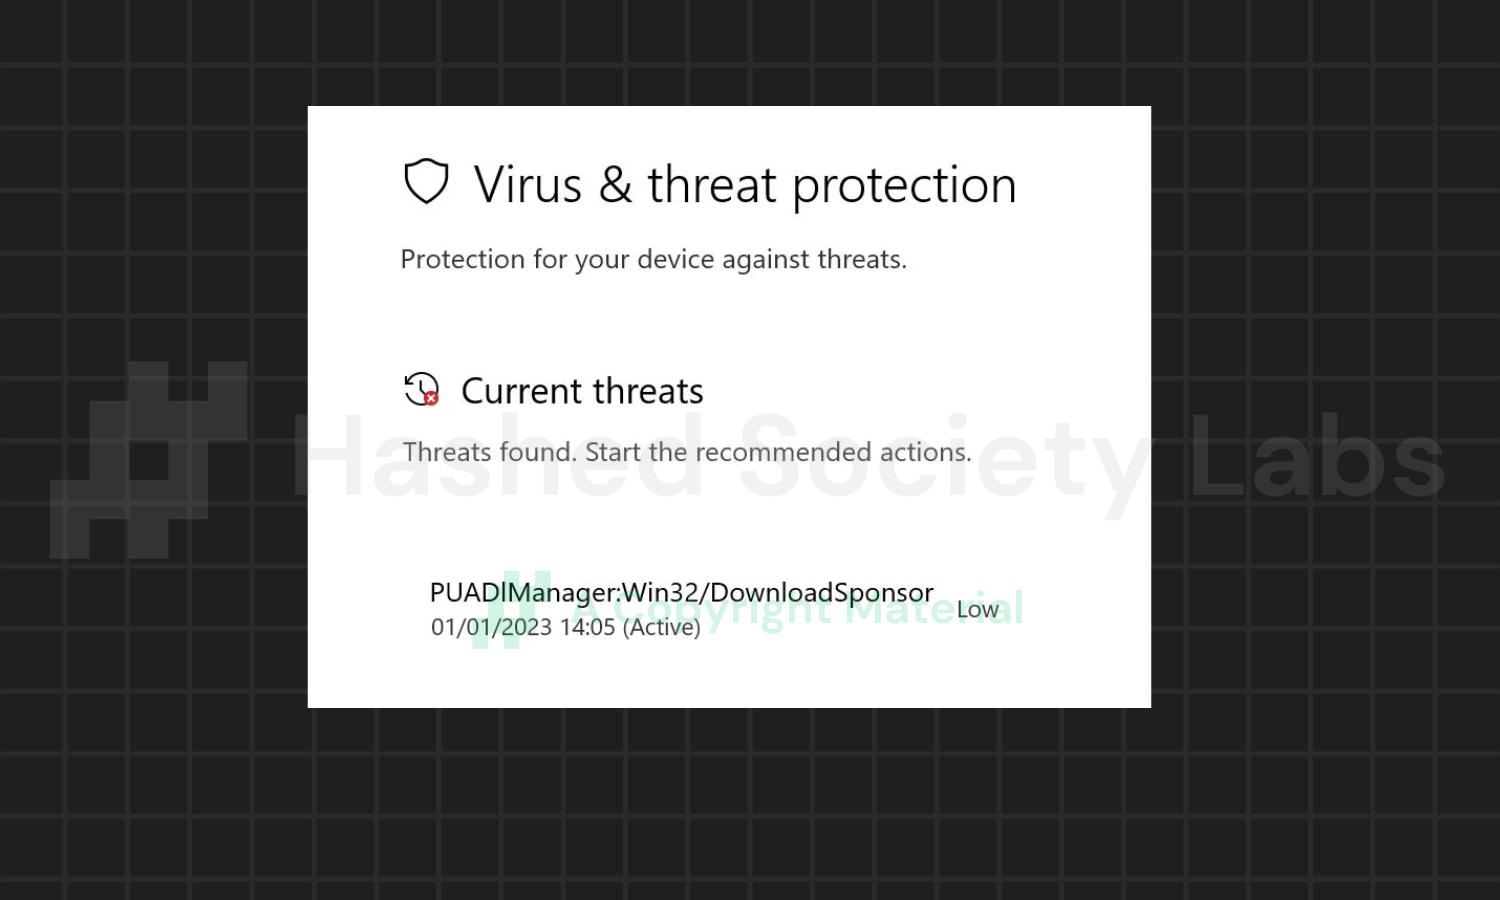 PUADlManager:Win32/DownloadSponsor threat found